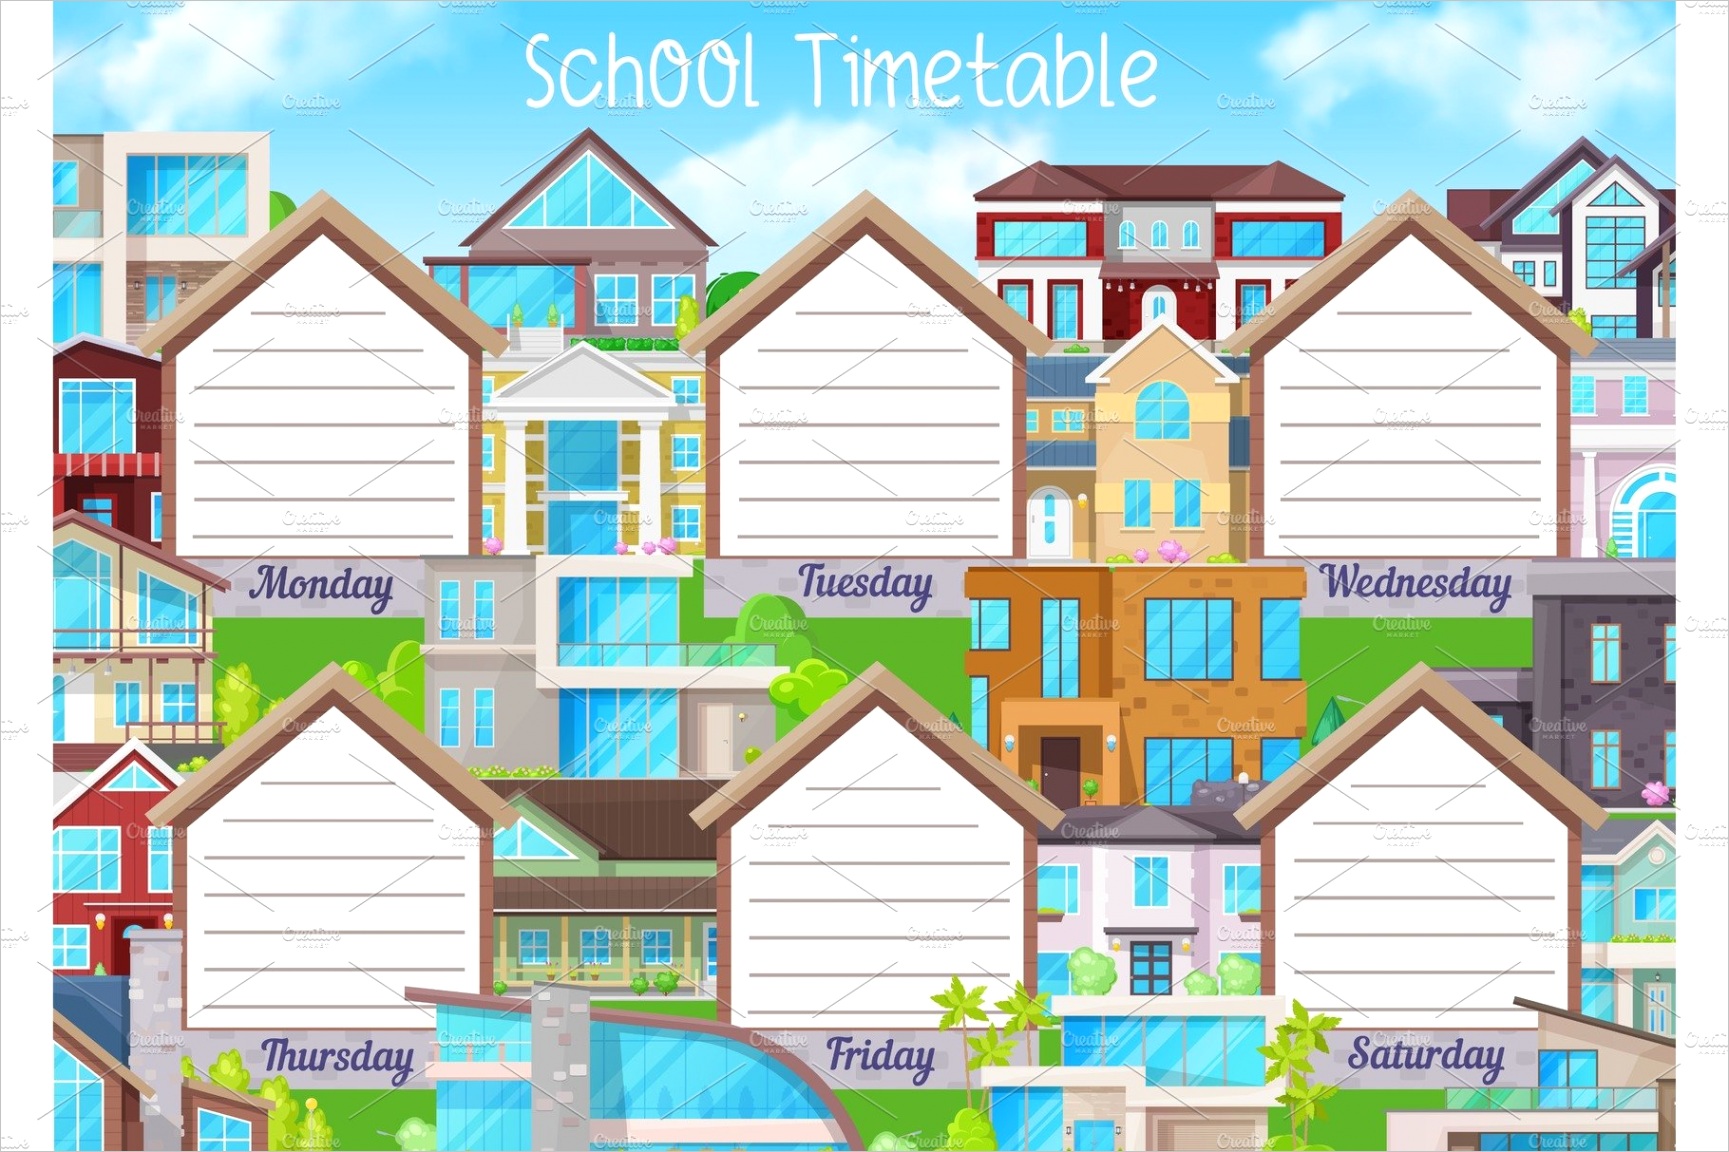 School timetable template